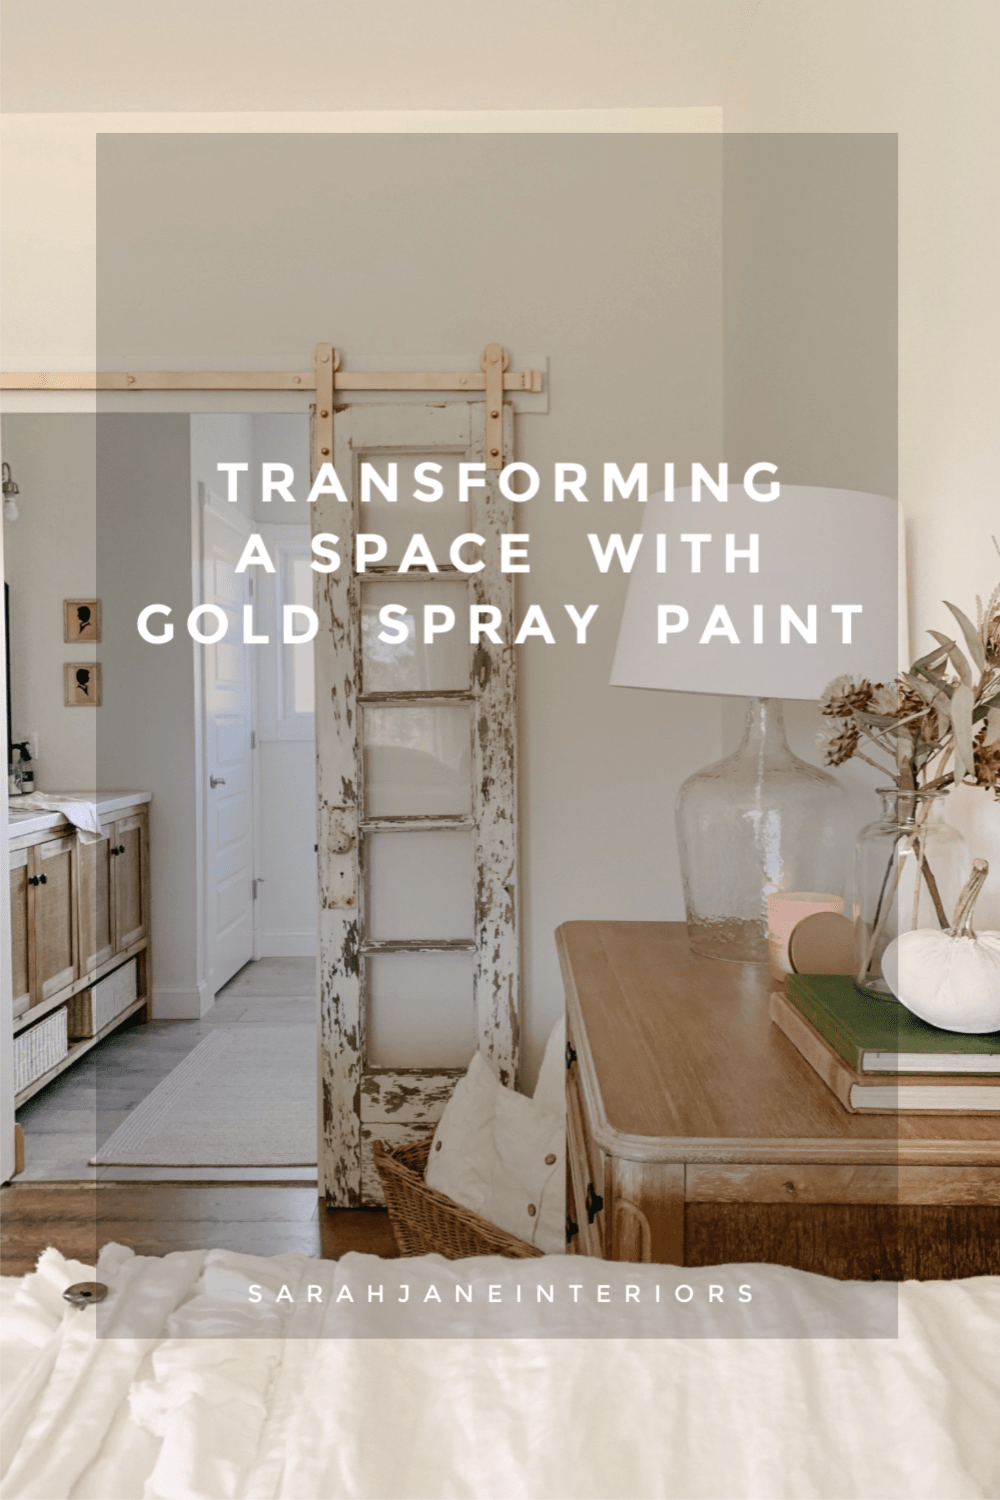 Using gold spray paint to transform a space